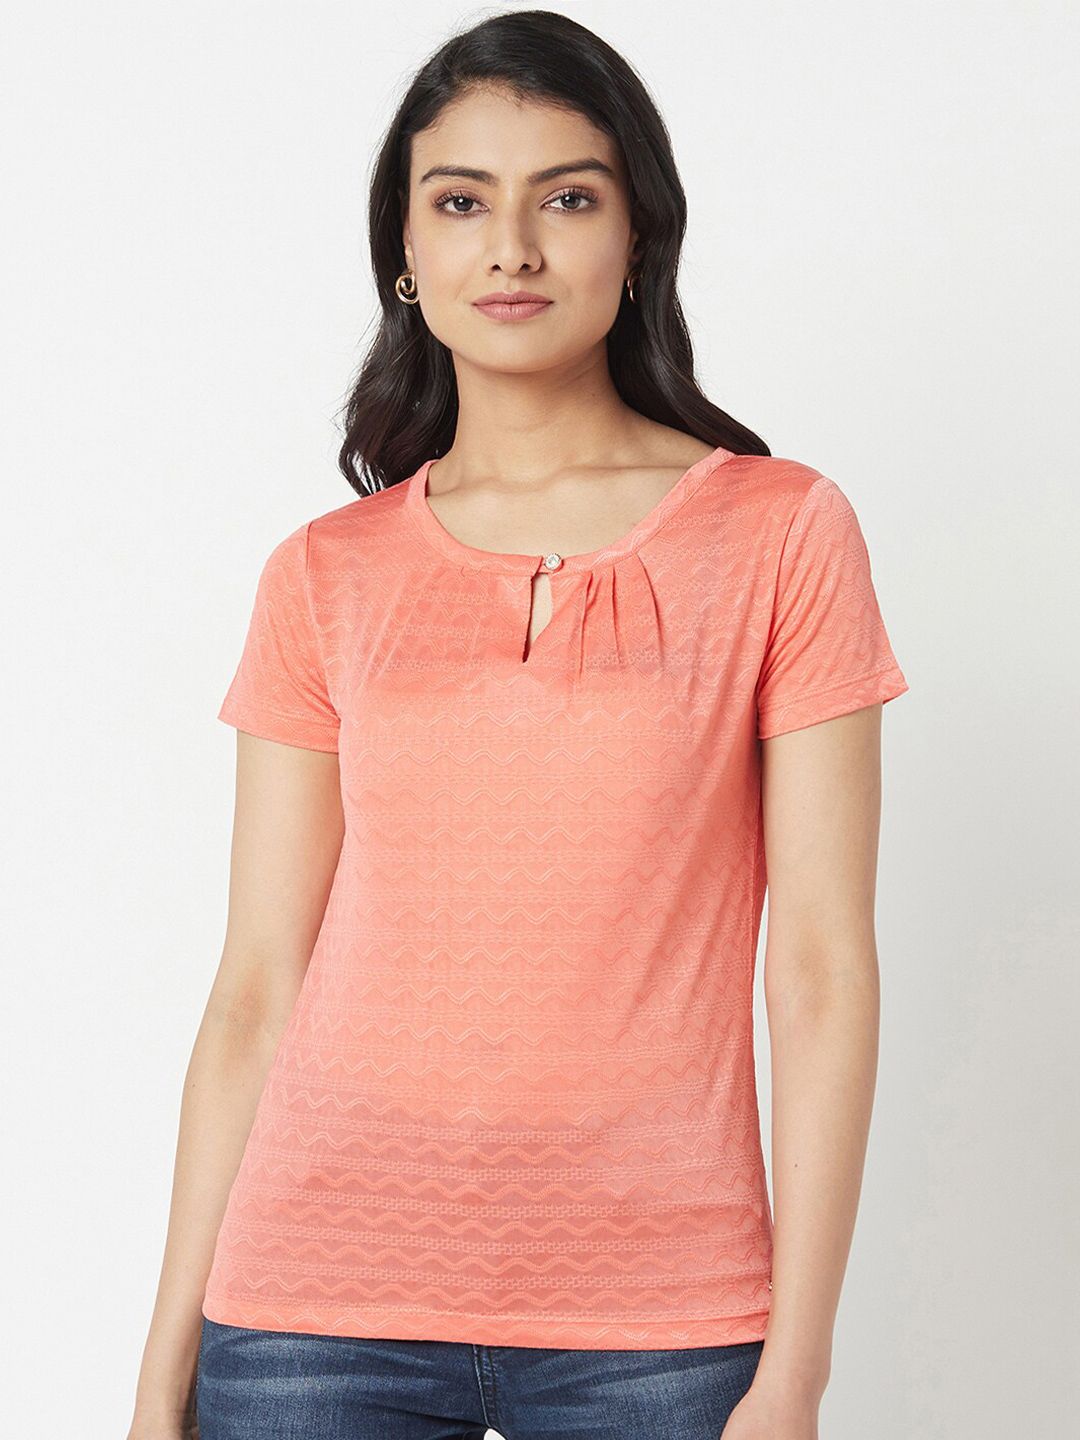 Miss Grace Self Design Keyhole Neck Pleated Top Price in India